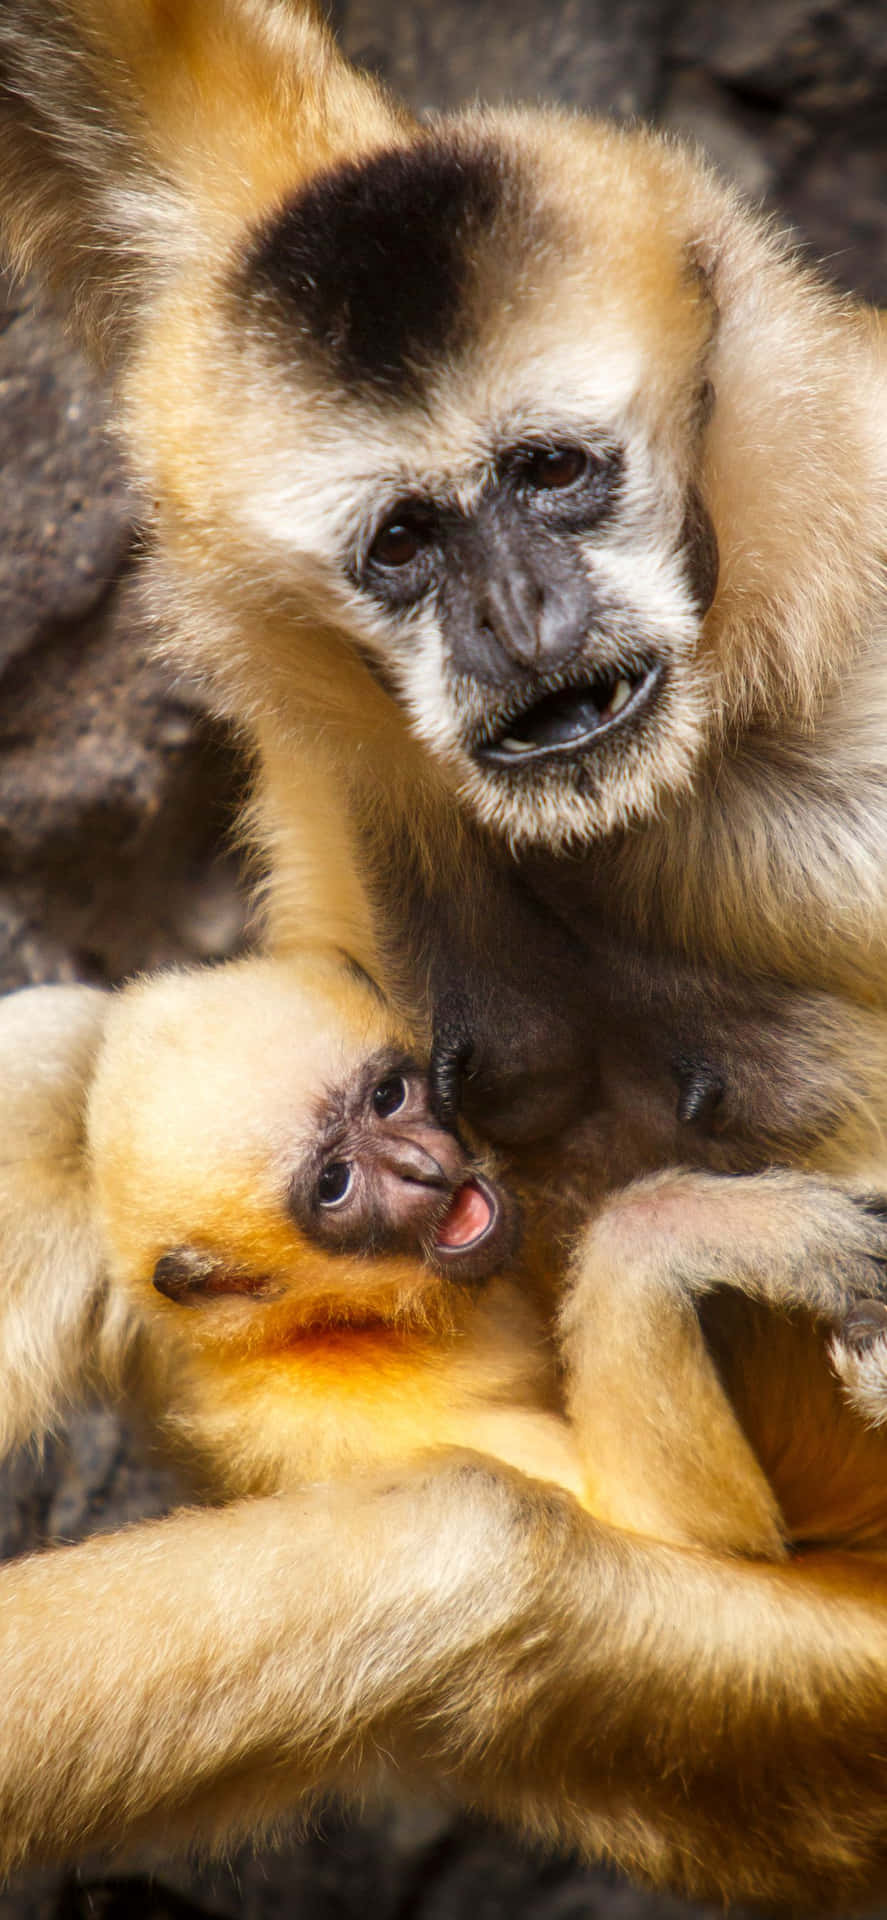 A close-up of the stunning Iphone Xs Max Gibbon in its full glory.